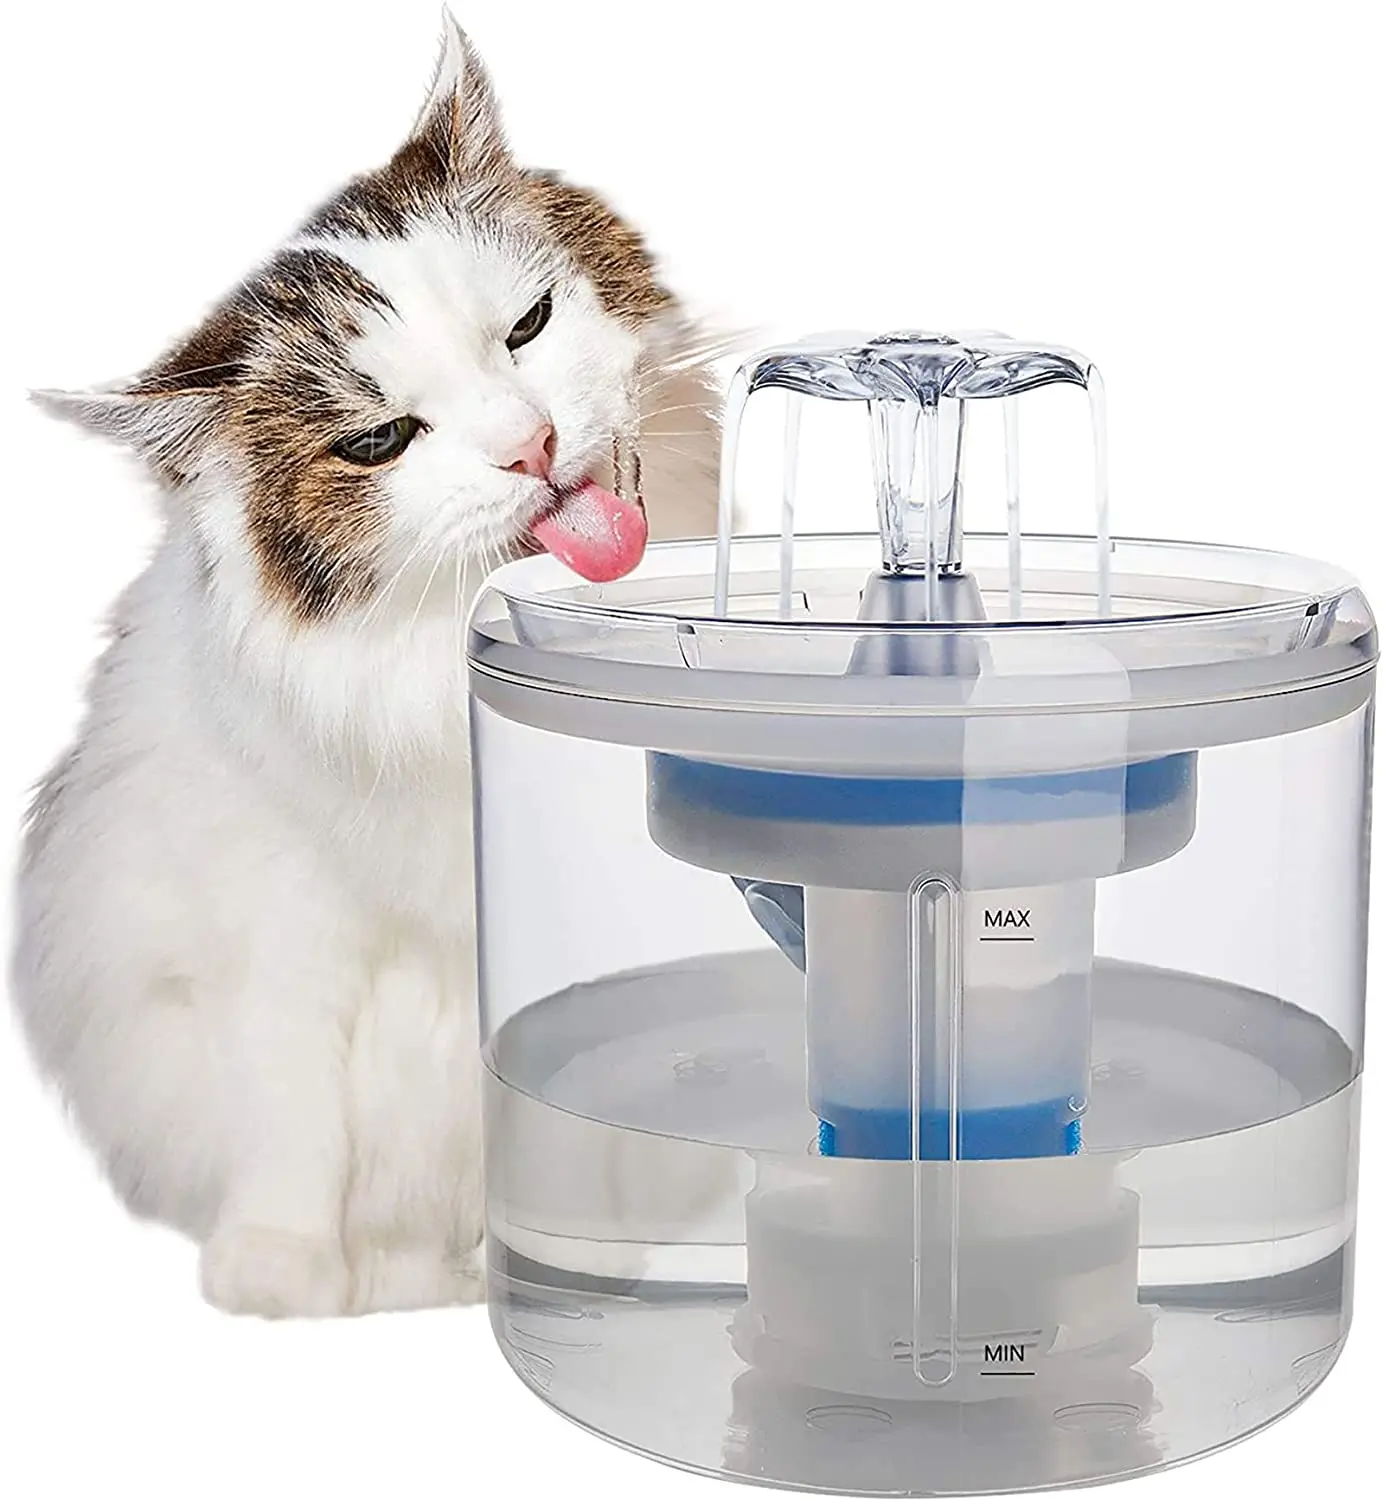 

New 2.6L Automatic Cat Water Fountain Large Capacity Quiet Pet Water Dispenser Circulation Filter Cat and Dog Drinking Fountains